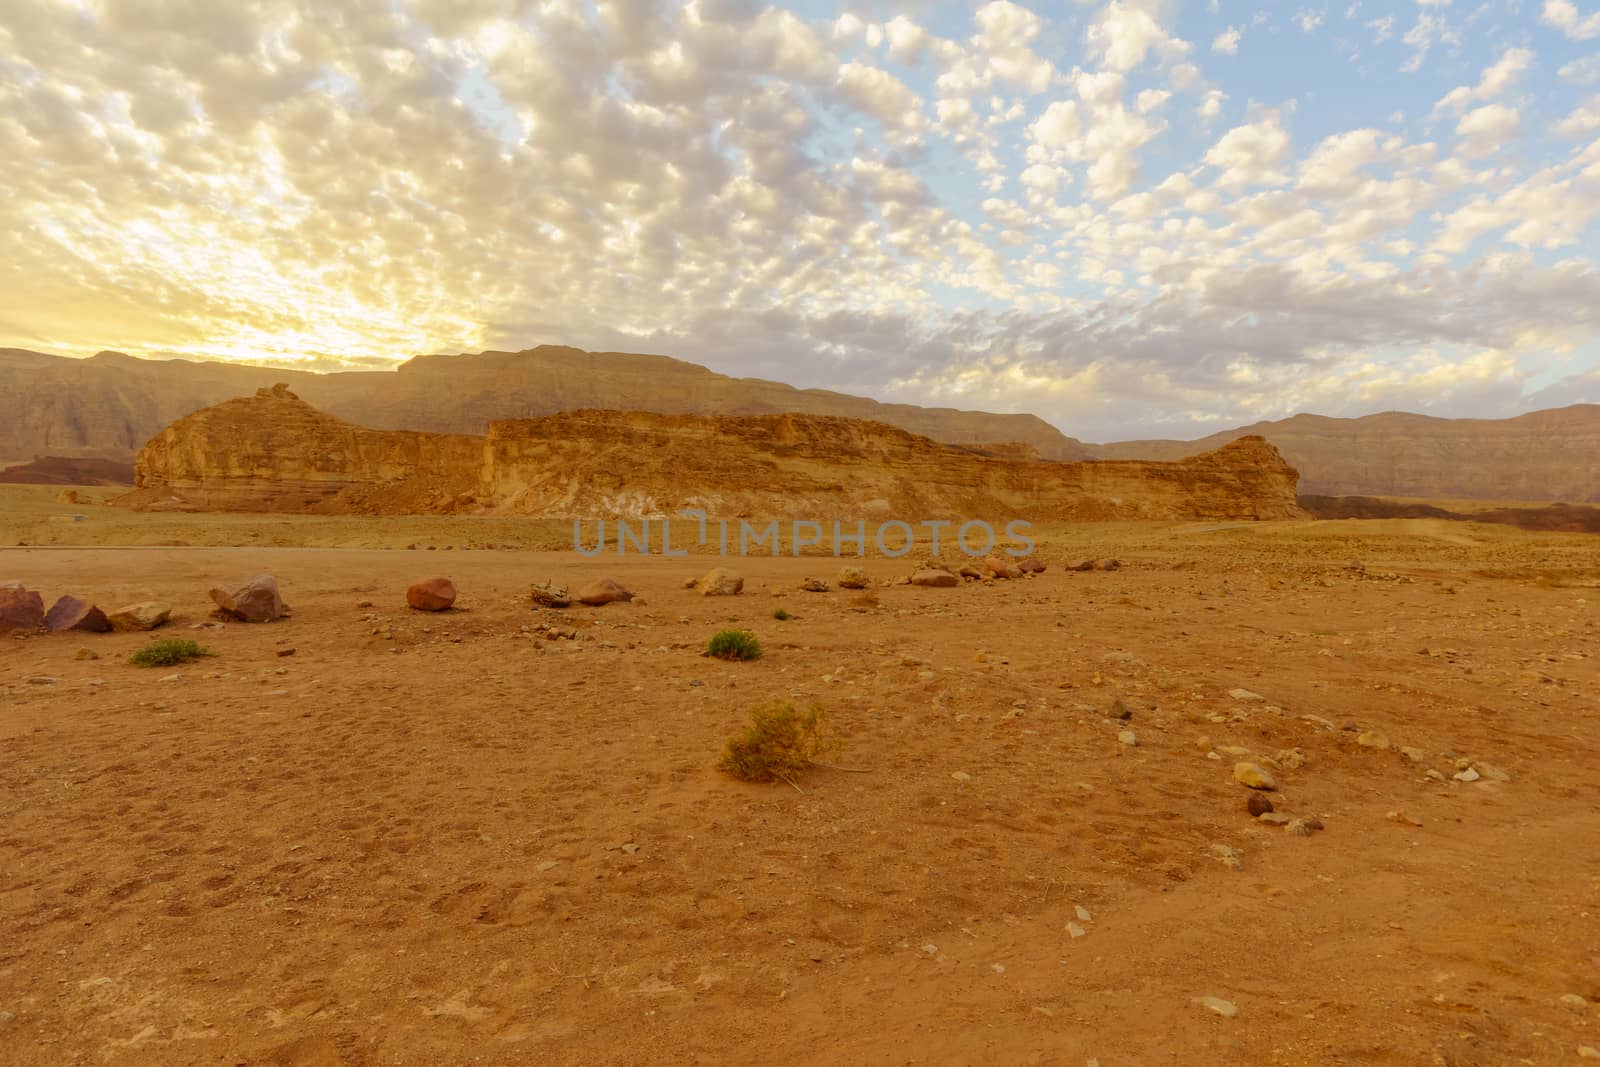 Sunset view of landscape and rock formations, Timna Valley by RnDmS